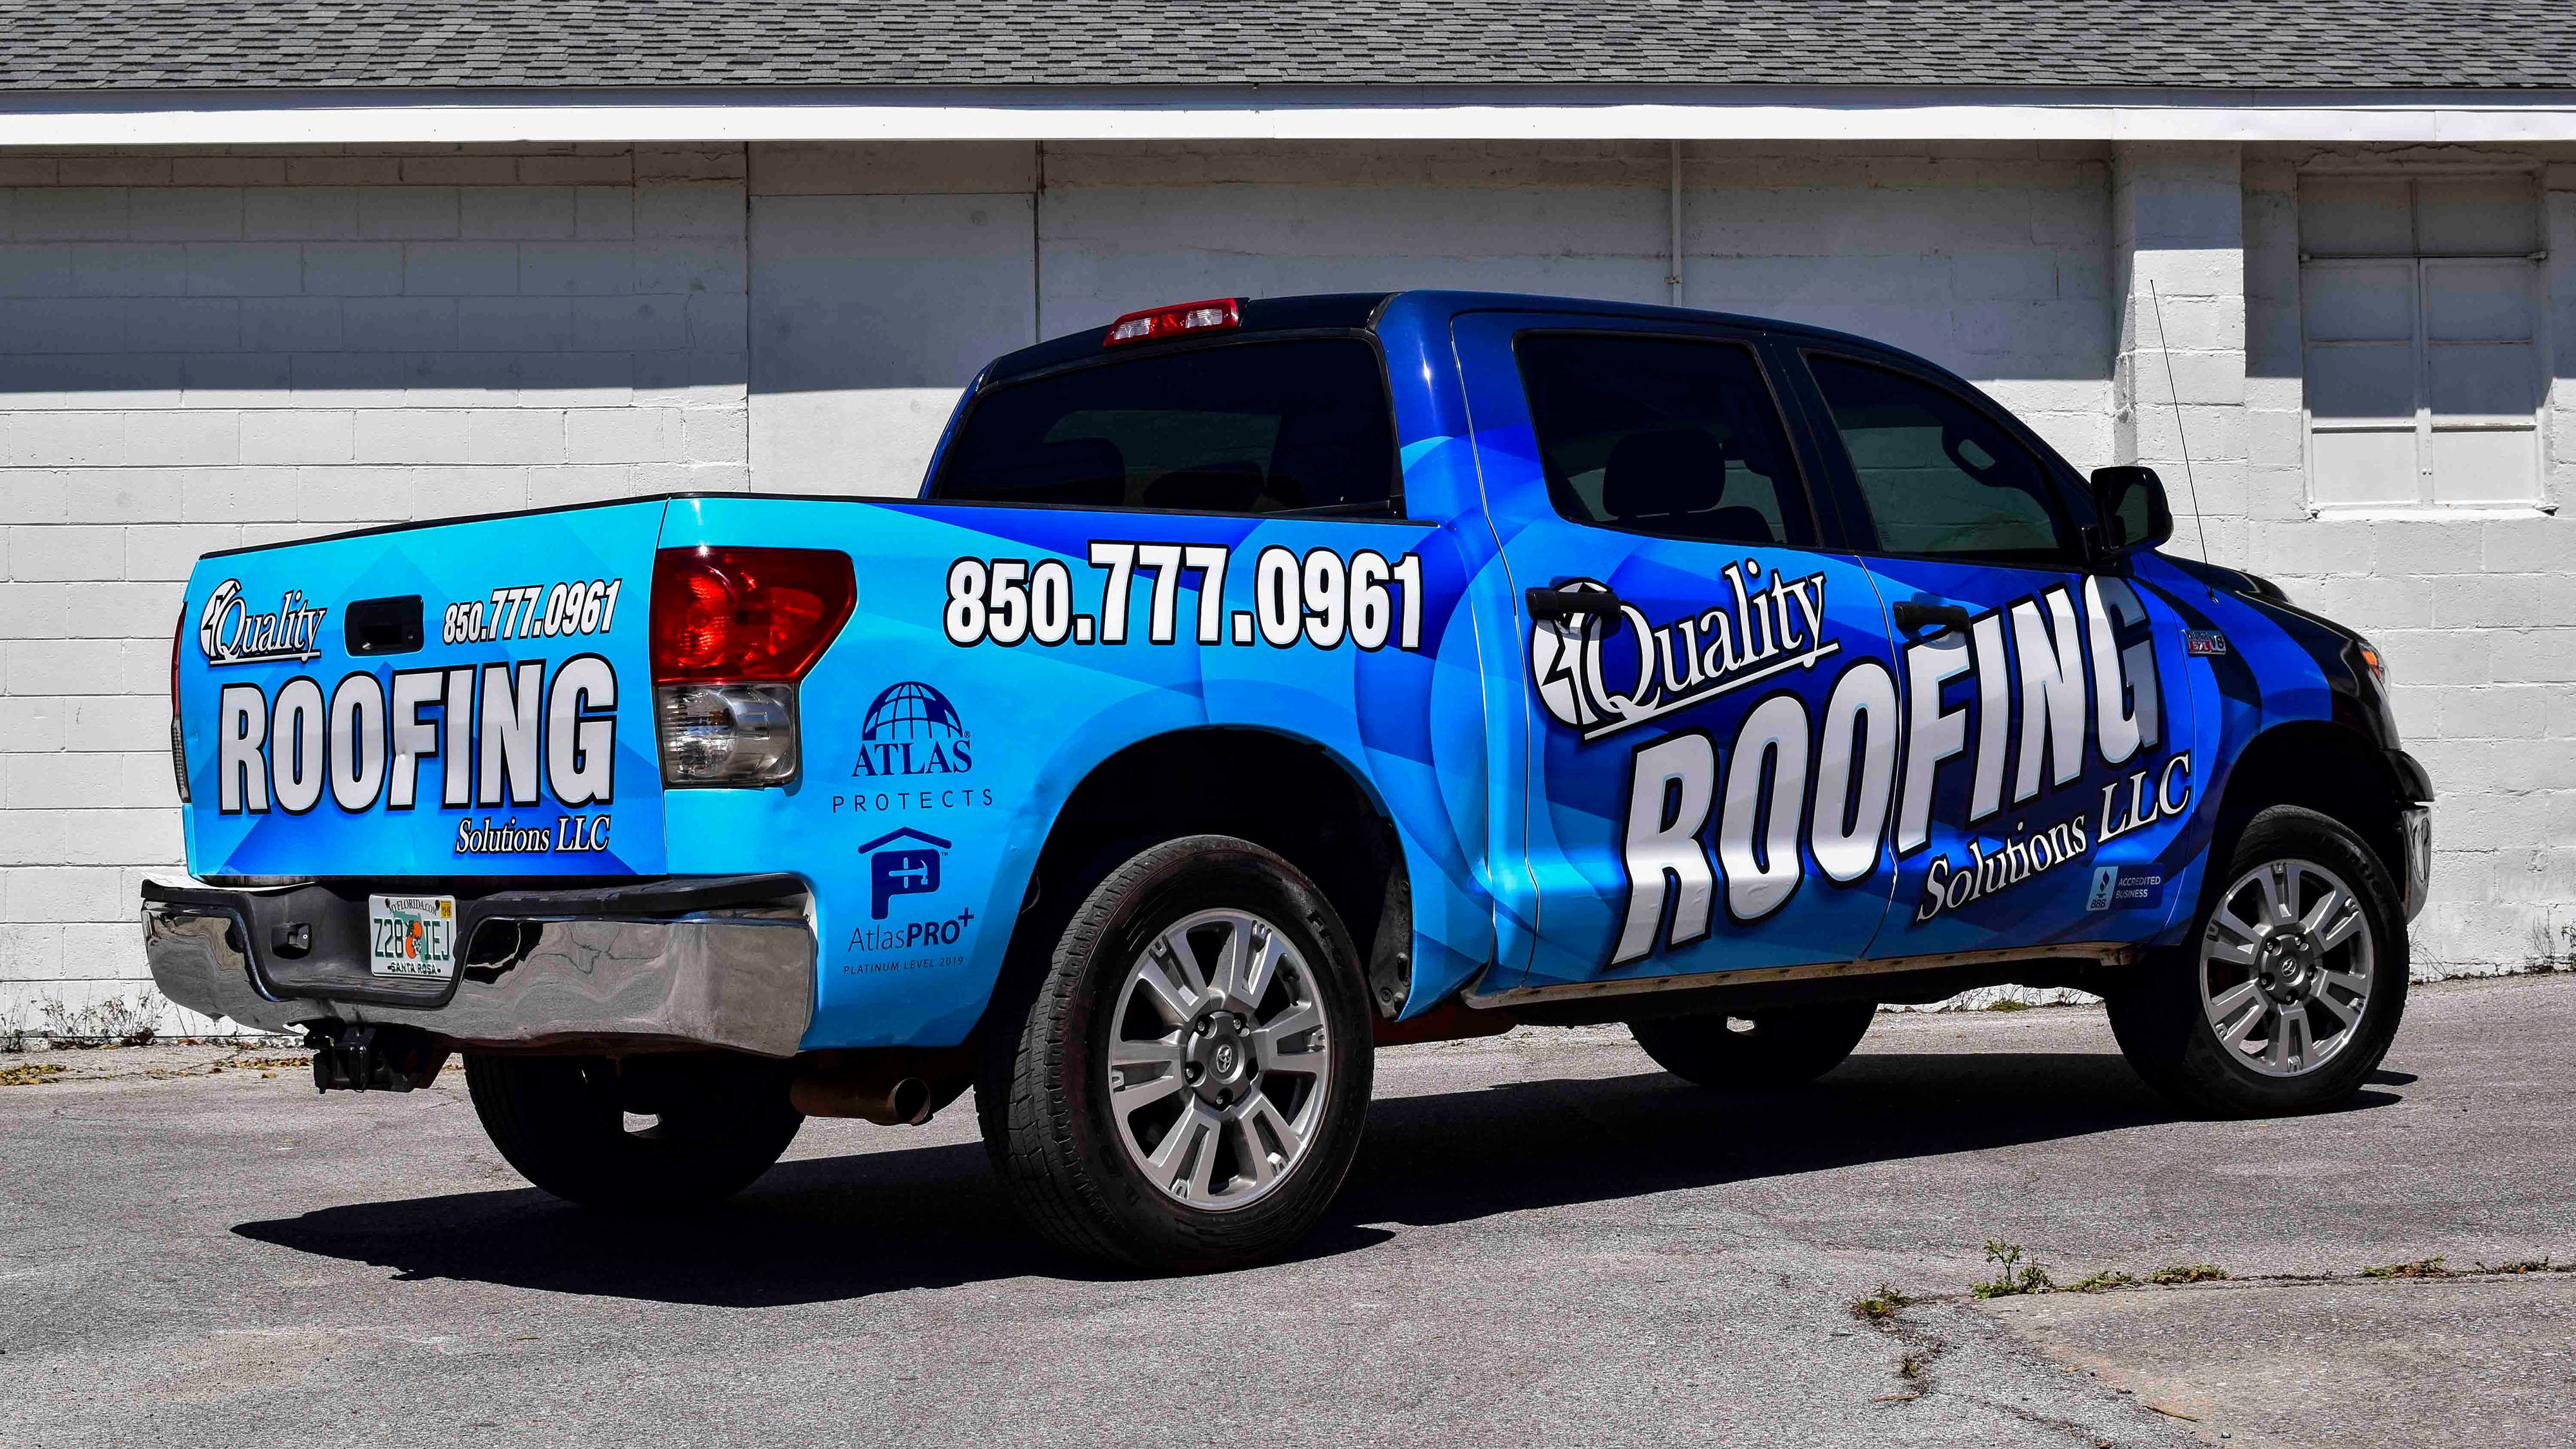 Quality Roofing company truck graphics wrapo